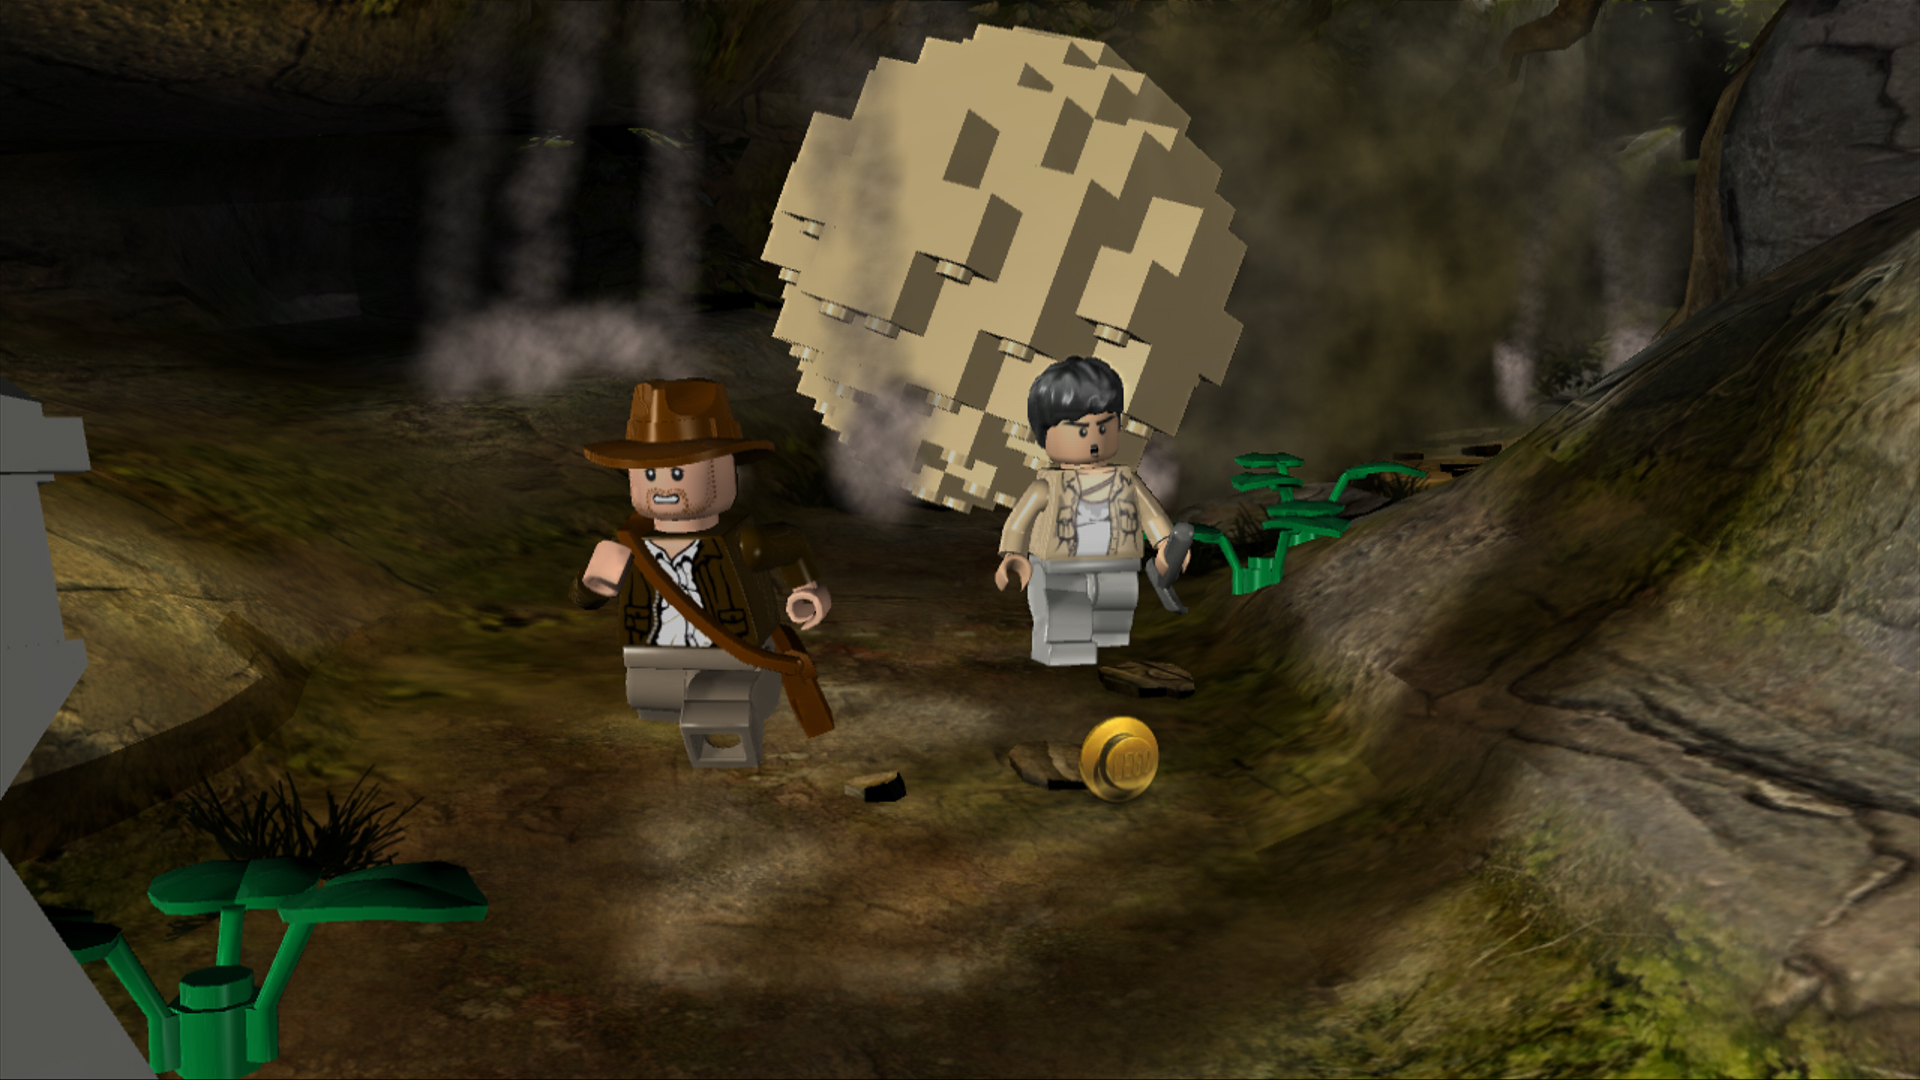 Free download Lego Indiana Jones Picture Wallpaper High Definition High Quality [1920x1080] for your Desktop, Mobile & Tablet. Explore LEGO Indiana Jones Wallpaper. LEGO Indiana Jones Wallpaper, Indiana Jones